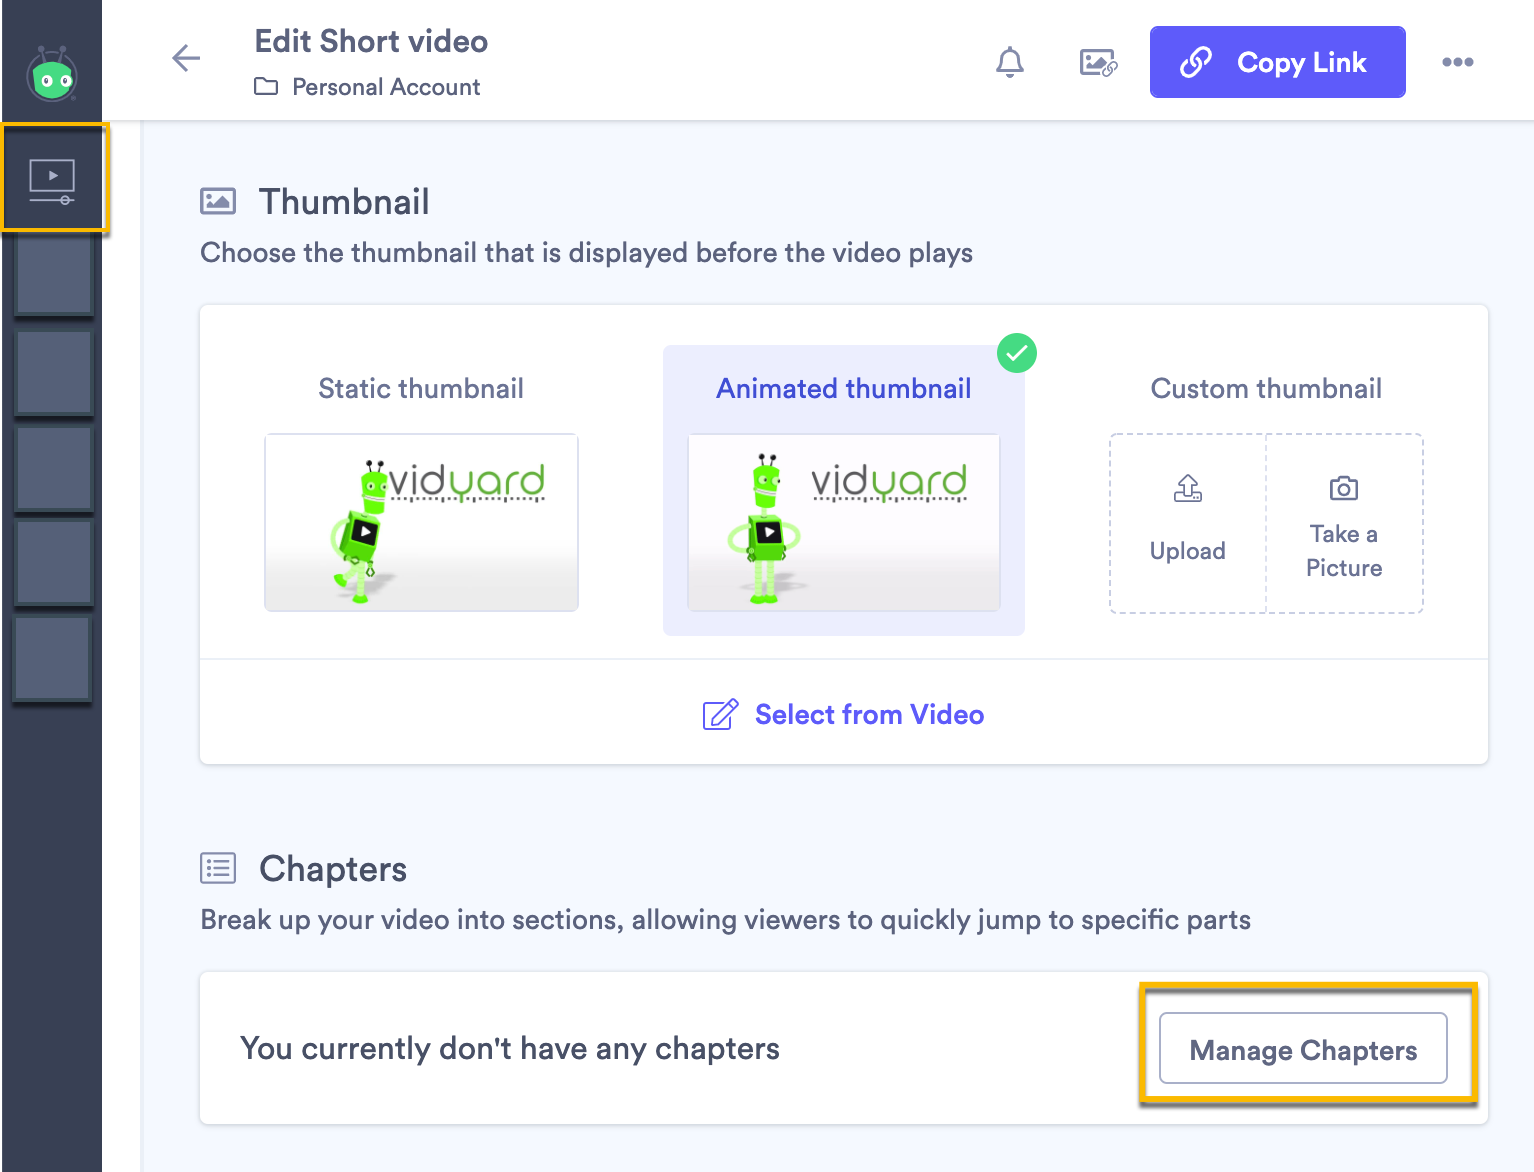 Video edit page showing chapters section to manage chapter addition